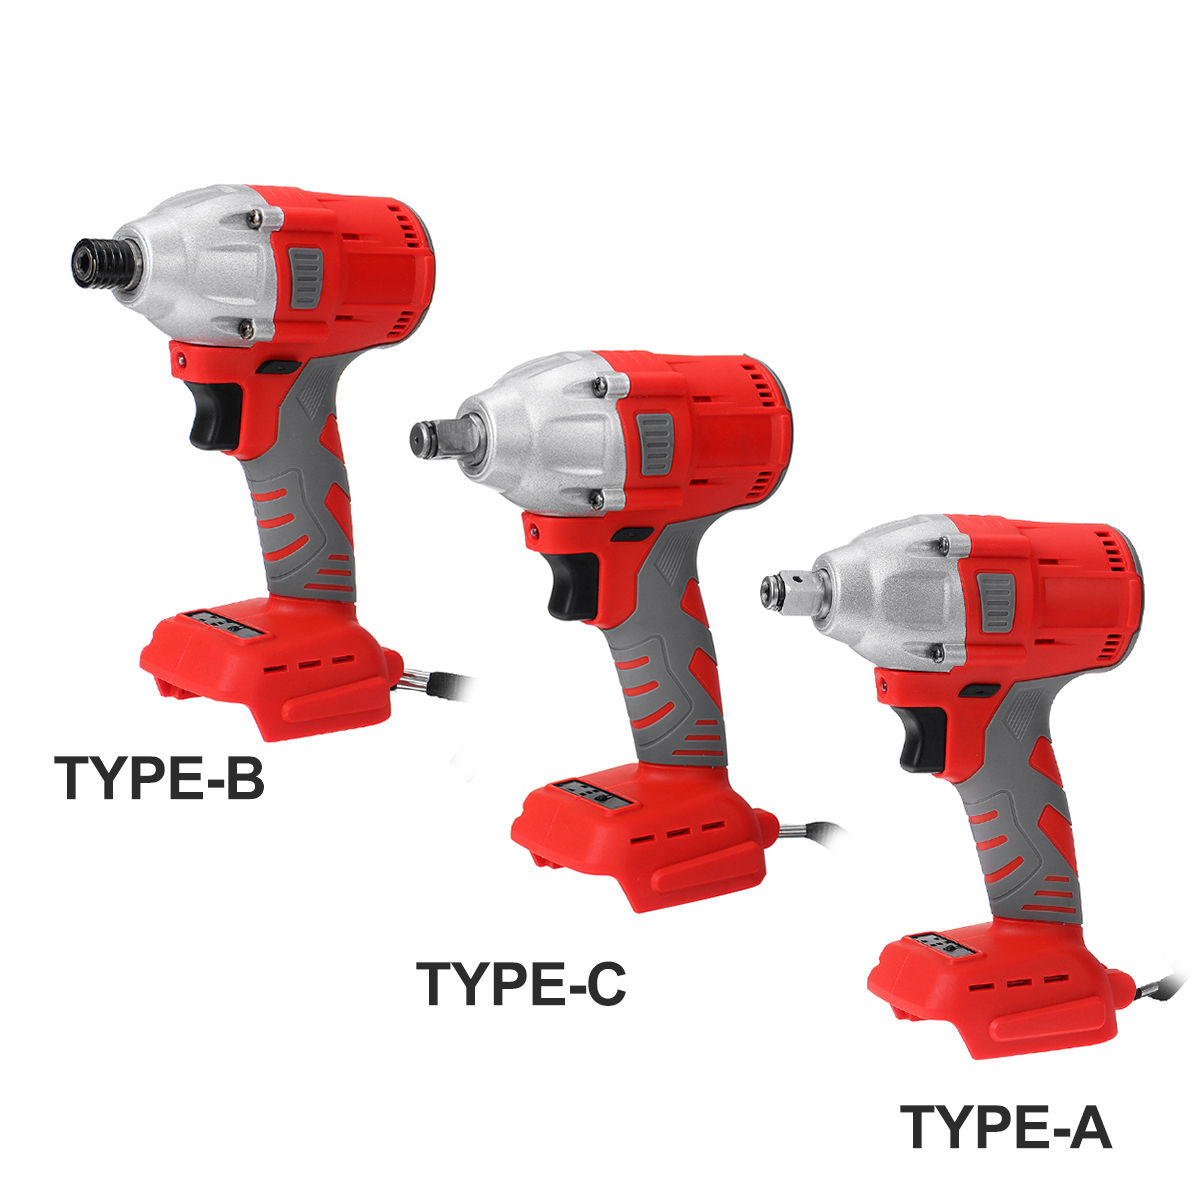 800NM-Brushless-Torque-Wrench-Electric-Screwdriver-Wrench-Cordless-Rechargable-Screw-Driver-Wrench-P-1843516-9